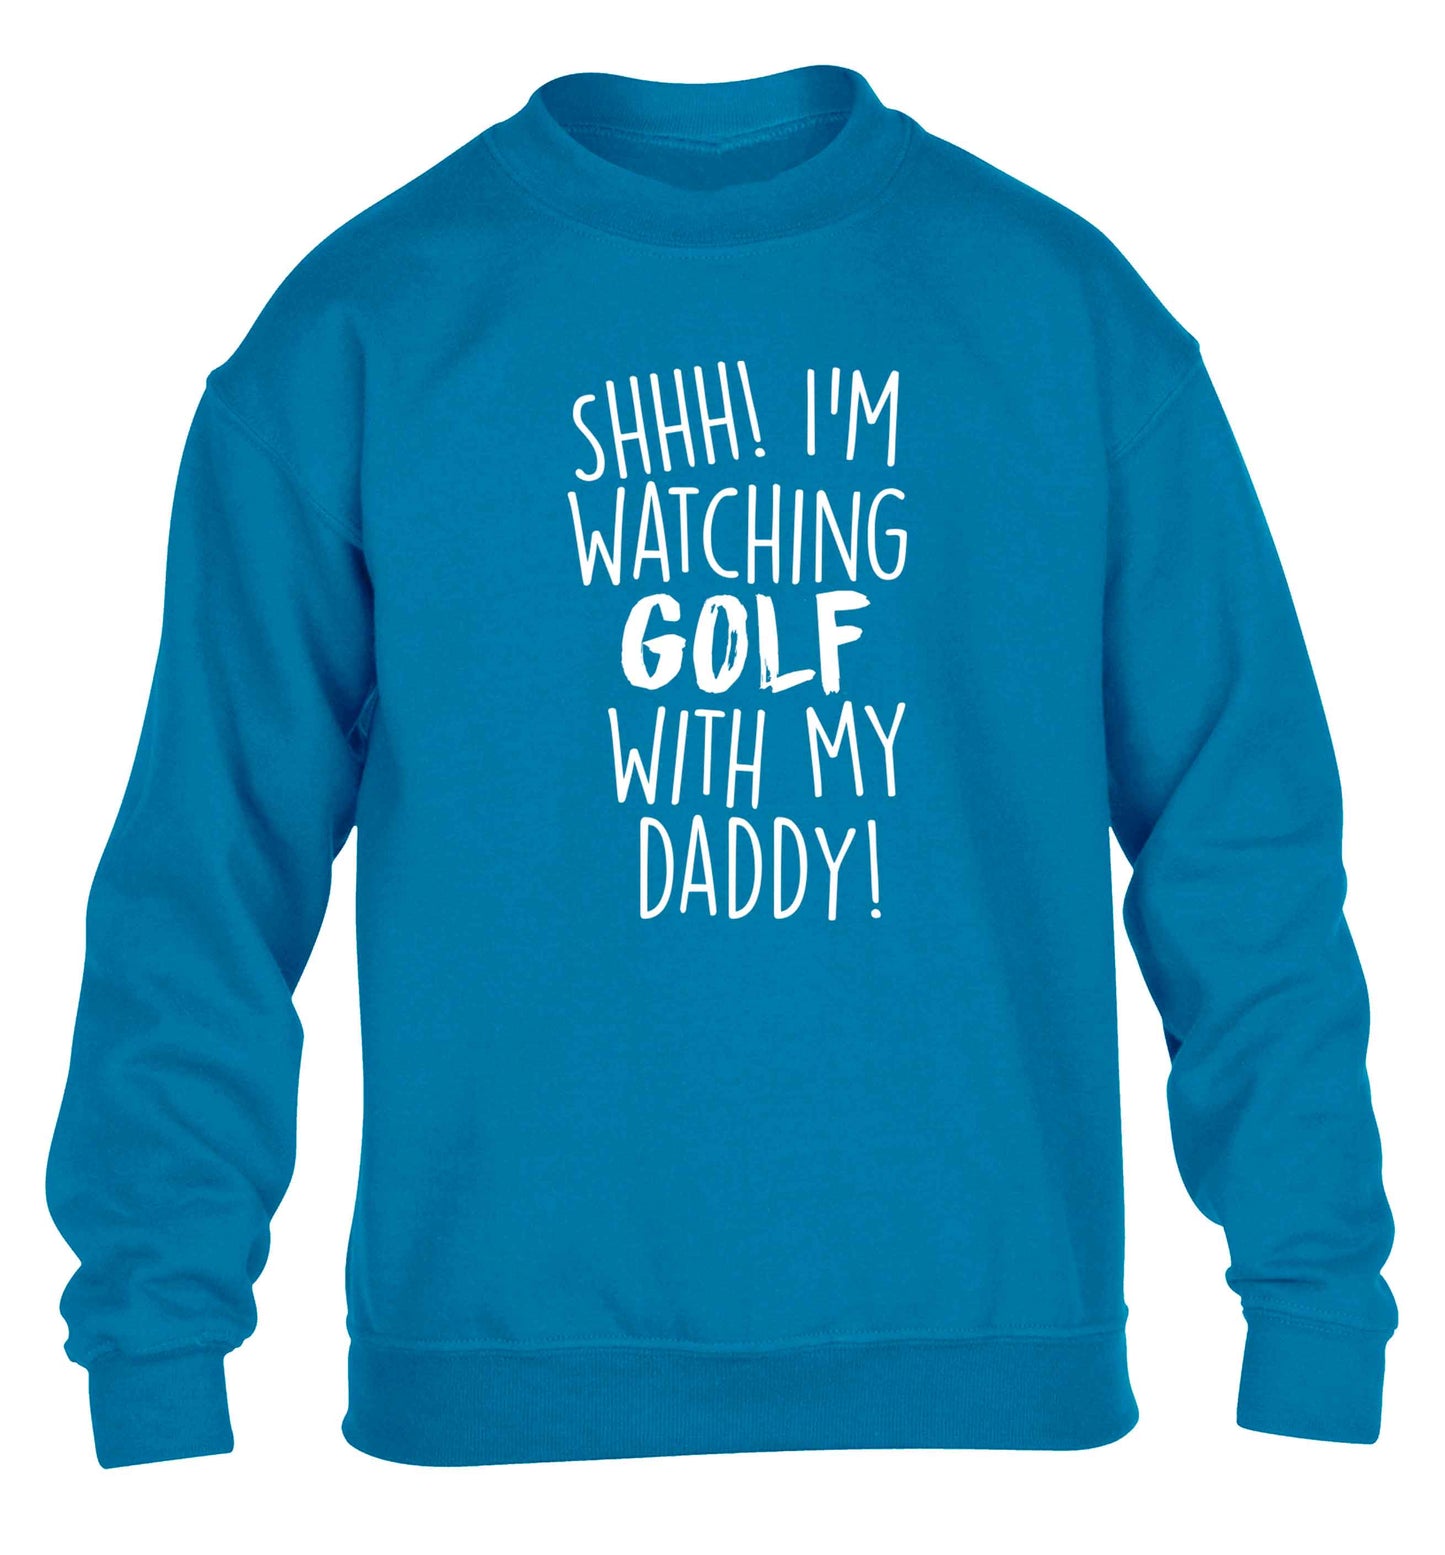 Shh I'm watching golf with my daddy children's blue sweater 12-13 Years